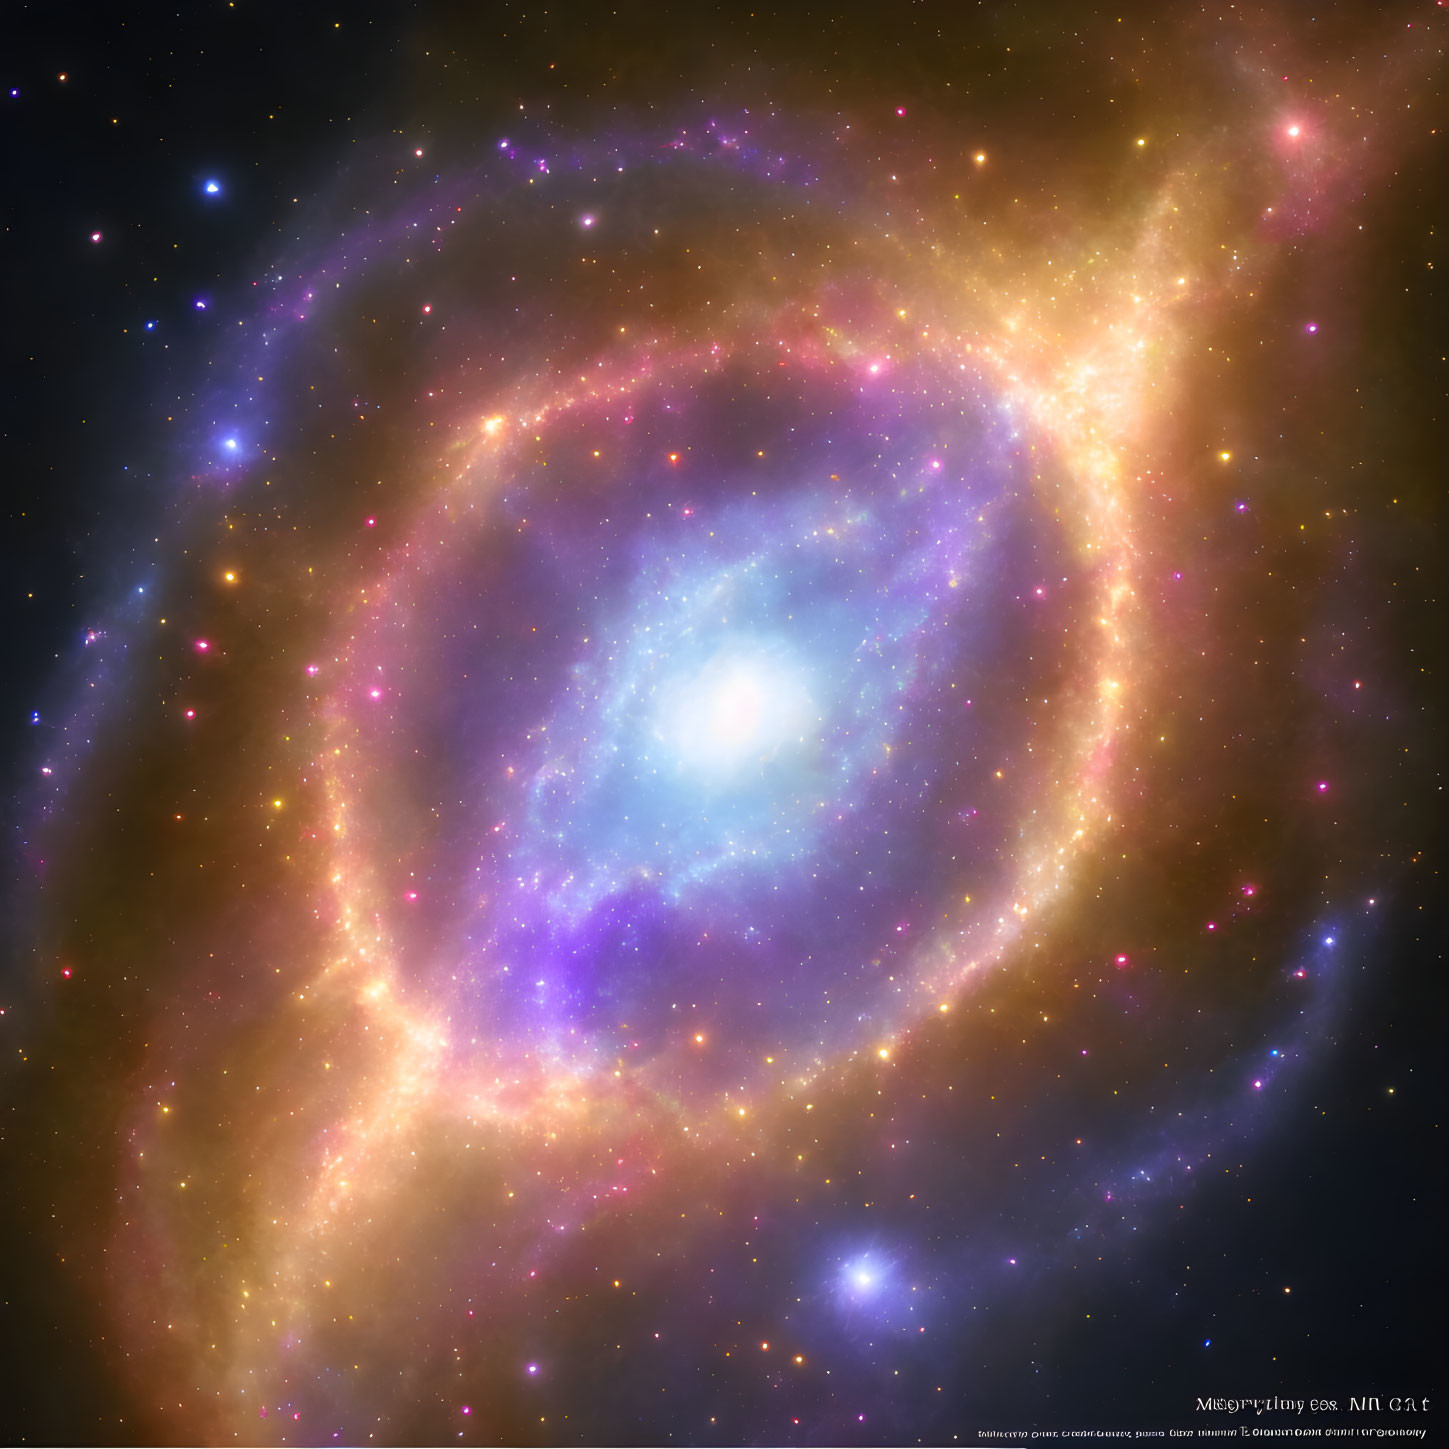 Colorful Spiral Galaxy with Blue, Purple, and Gold Swirling Arms